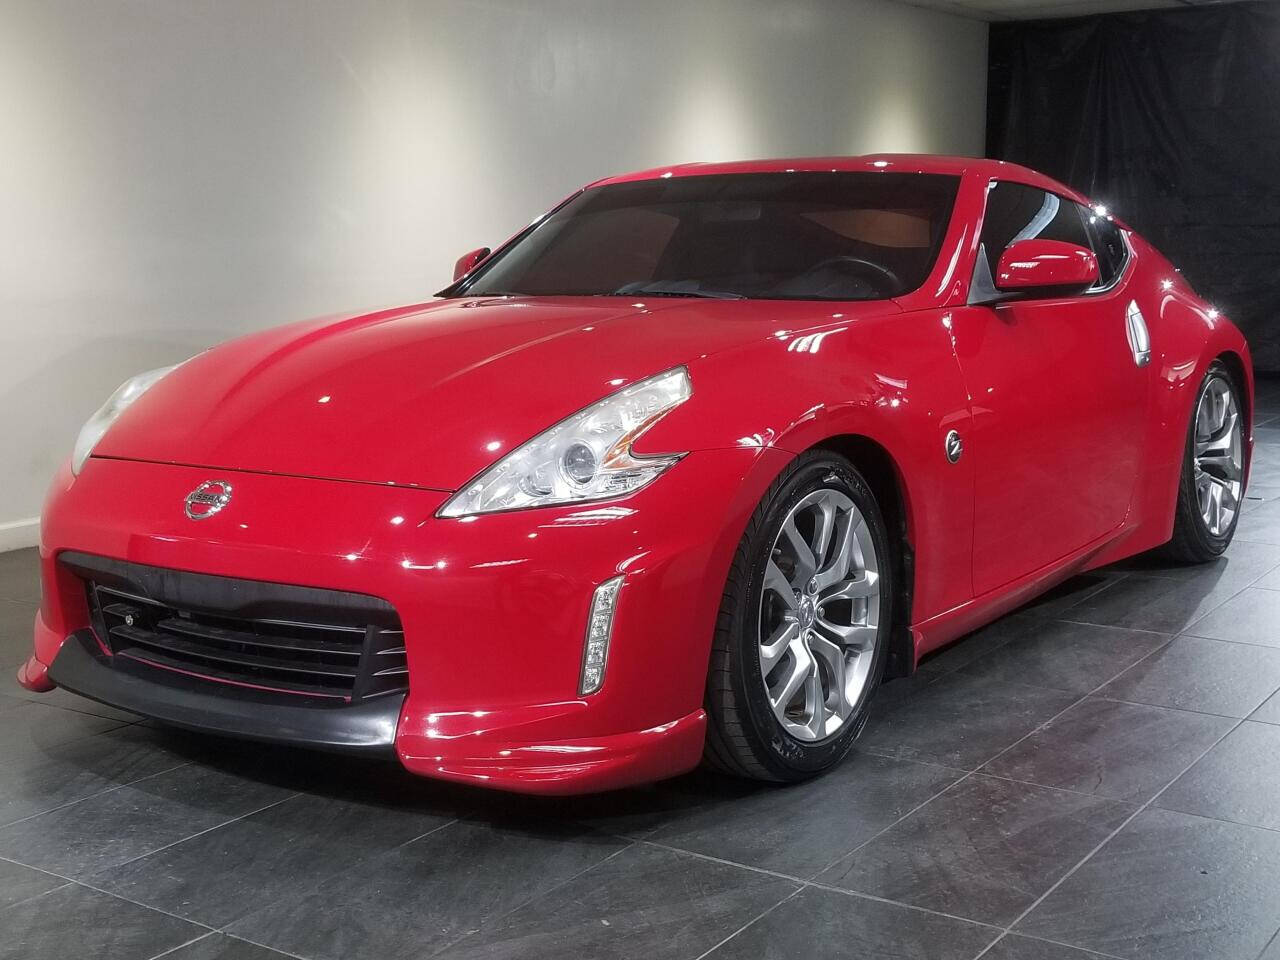 Used Nissan 370Z for Sale Near Madison, WI